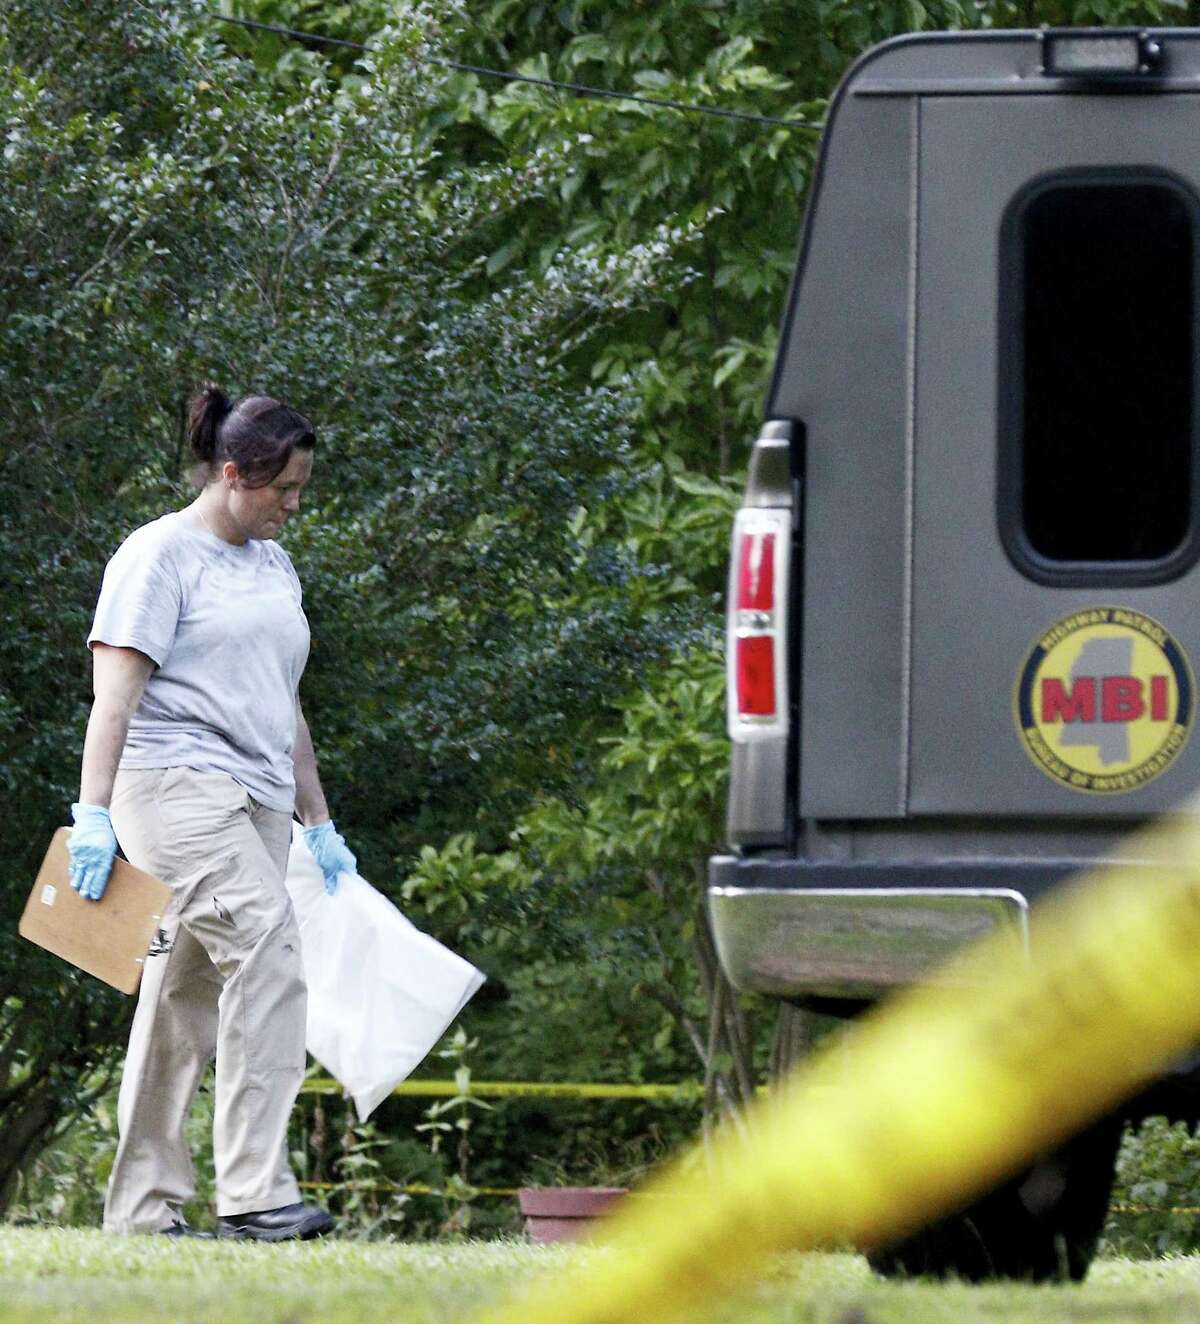 A Mississippi Bureau of Investigation agent takes a bag with evidence from the Durant, Miss., home of two slain Catholic nuns who worked as nurses at the Lexington Medical Clinic, to her vehicle, Thursday, Aug. 25, 2016. The clinic office manager and a Durant police officer discovered their bodies inside the house after both nuns did not report for work. Authorities said there were signs of a break-in and their vehicle was missing.